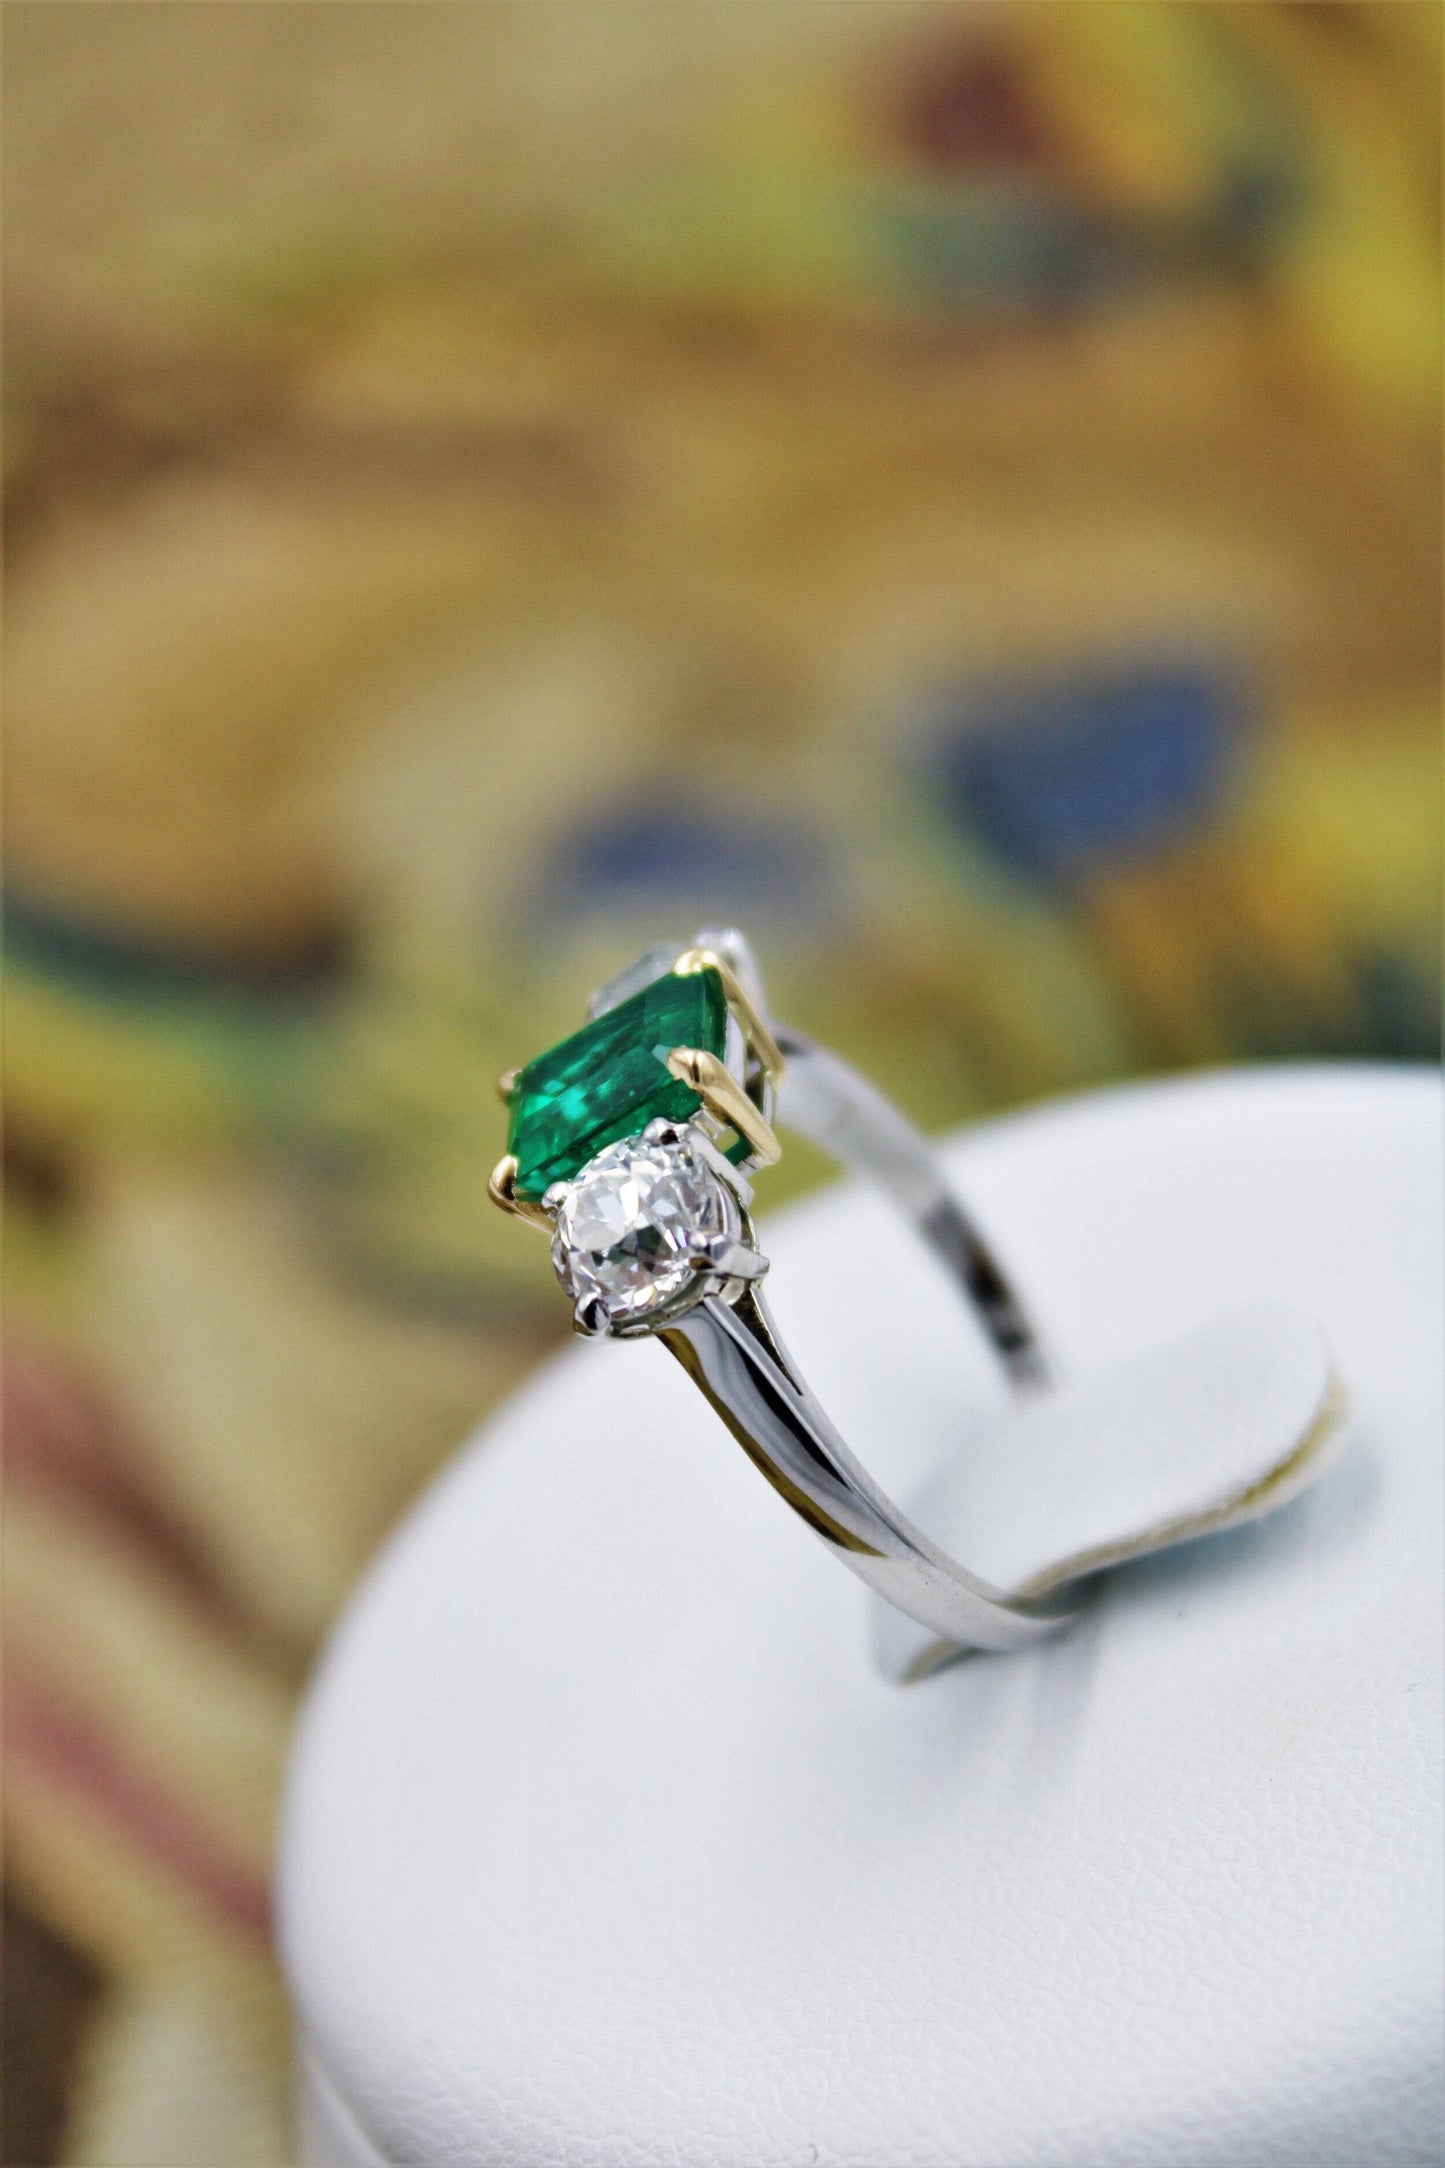 An exceptional Emerald and Diamond Three Stone Ring mounted in Platinum (Marked) and 18 Carat Gold, Pre-Owned - Robin Haydock Antiques